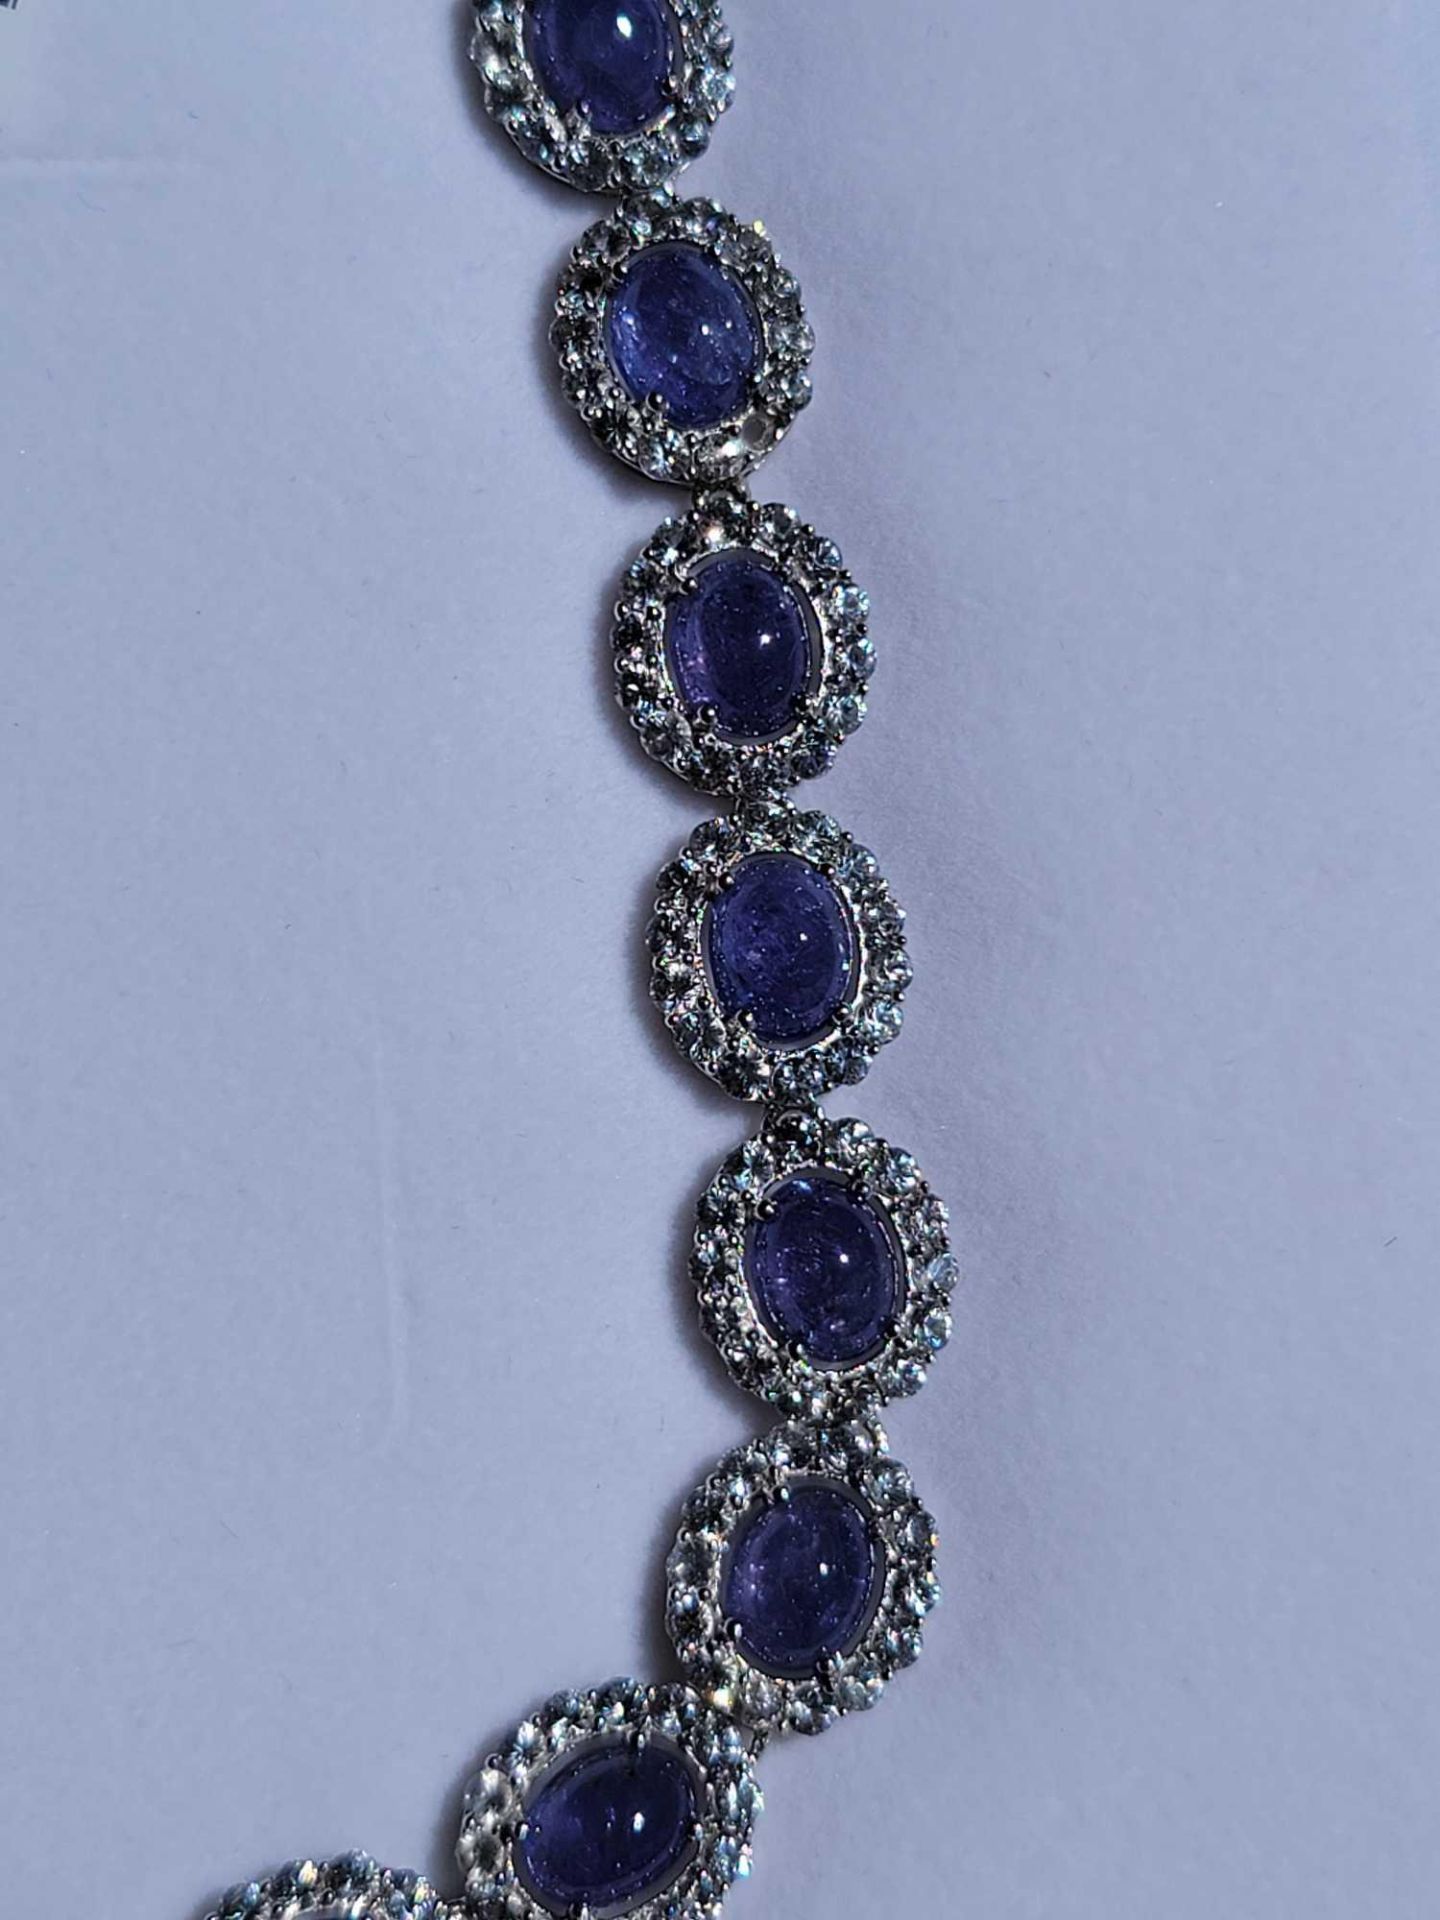 Tanzanite and Colorless Sapphire Necklace - Image 7 of 7